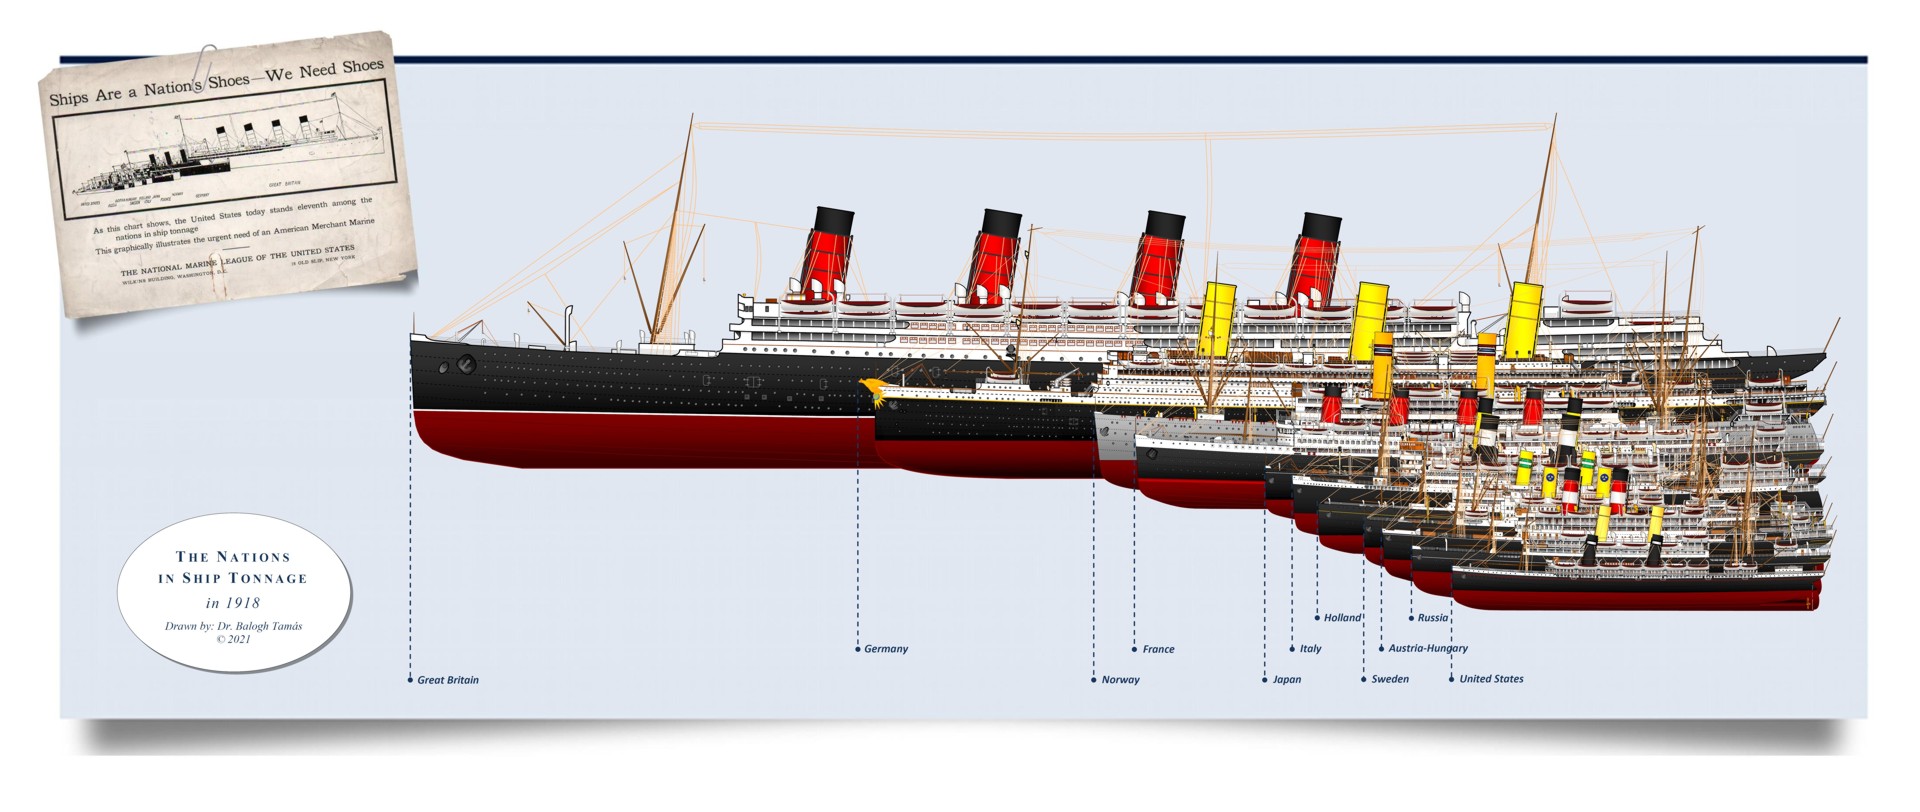 002_nations_in_ship_tonnage_small_for_website.jpg